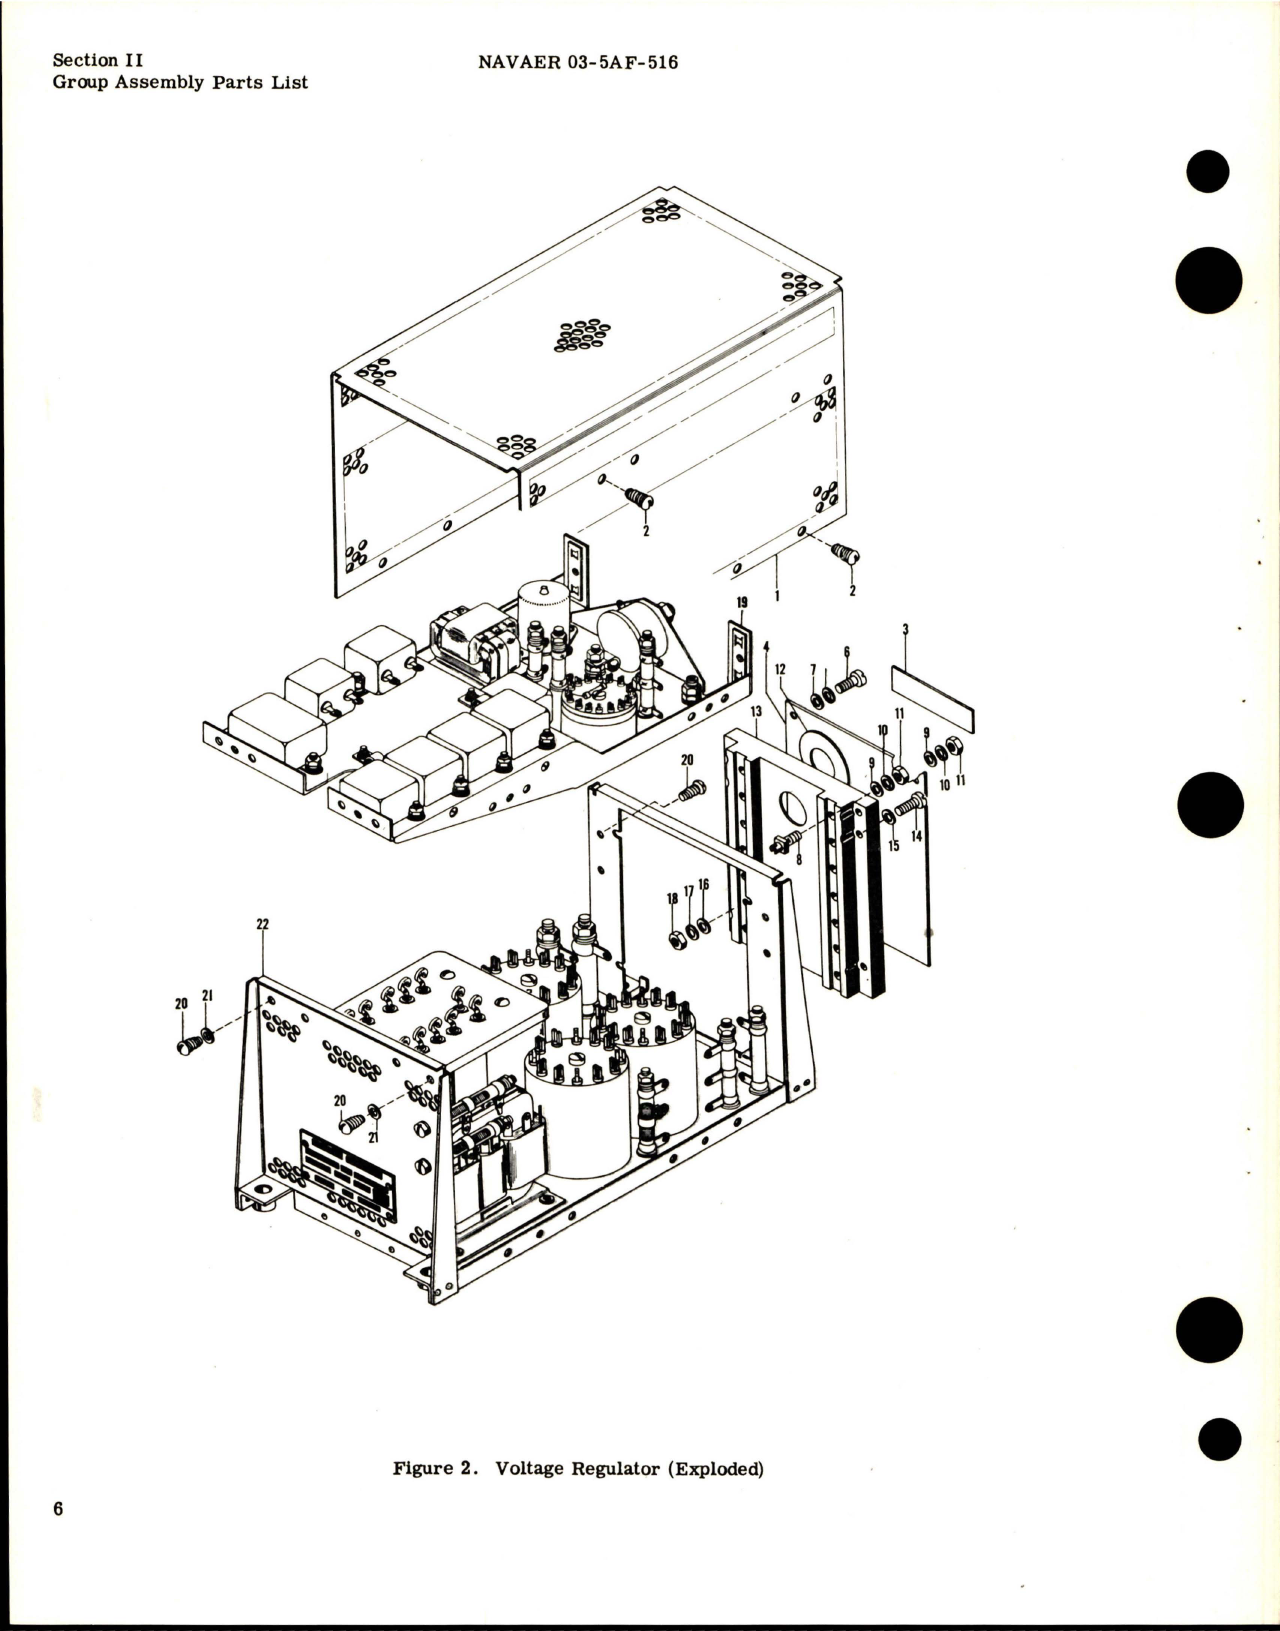 Sample page 8 from AirCorps Library document: Illustrated Parts Breakdown for Voltage Regulator - Part A40A1750